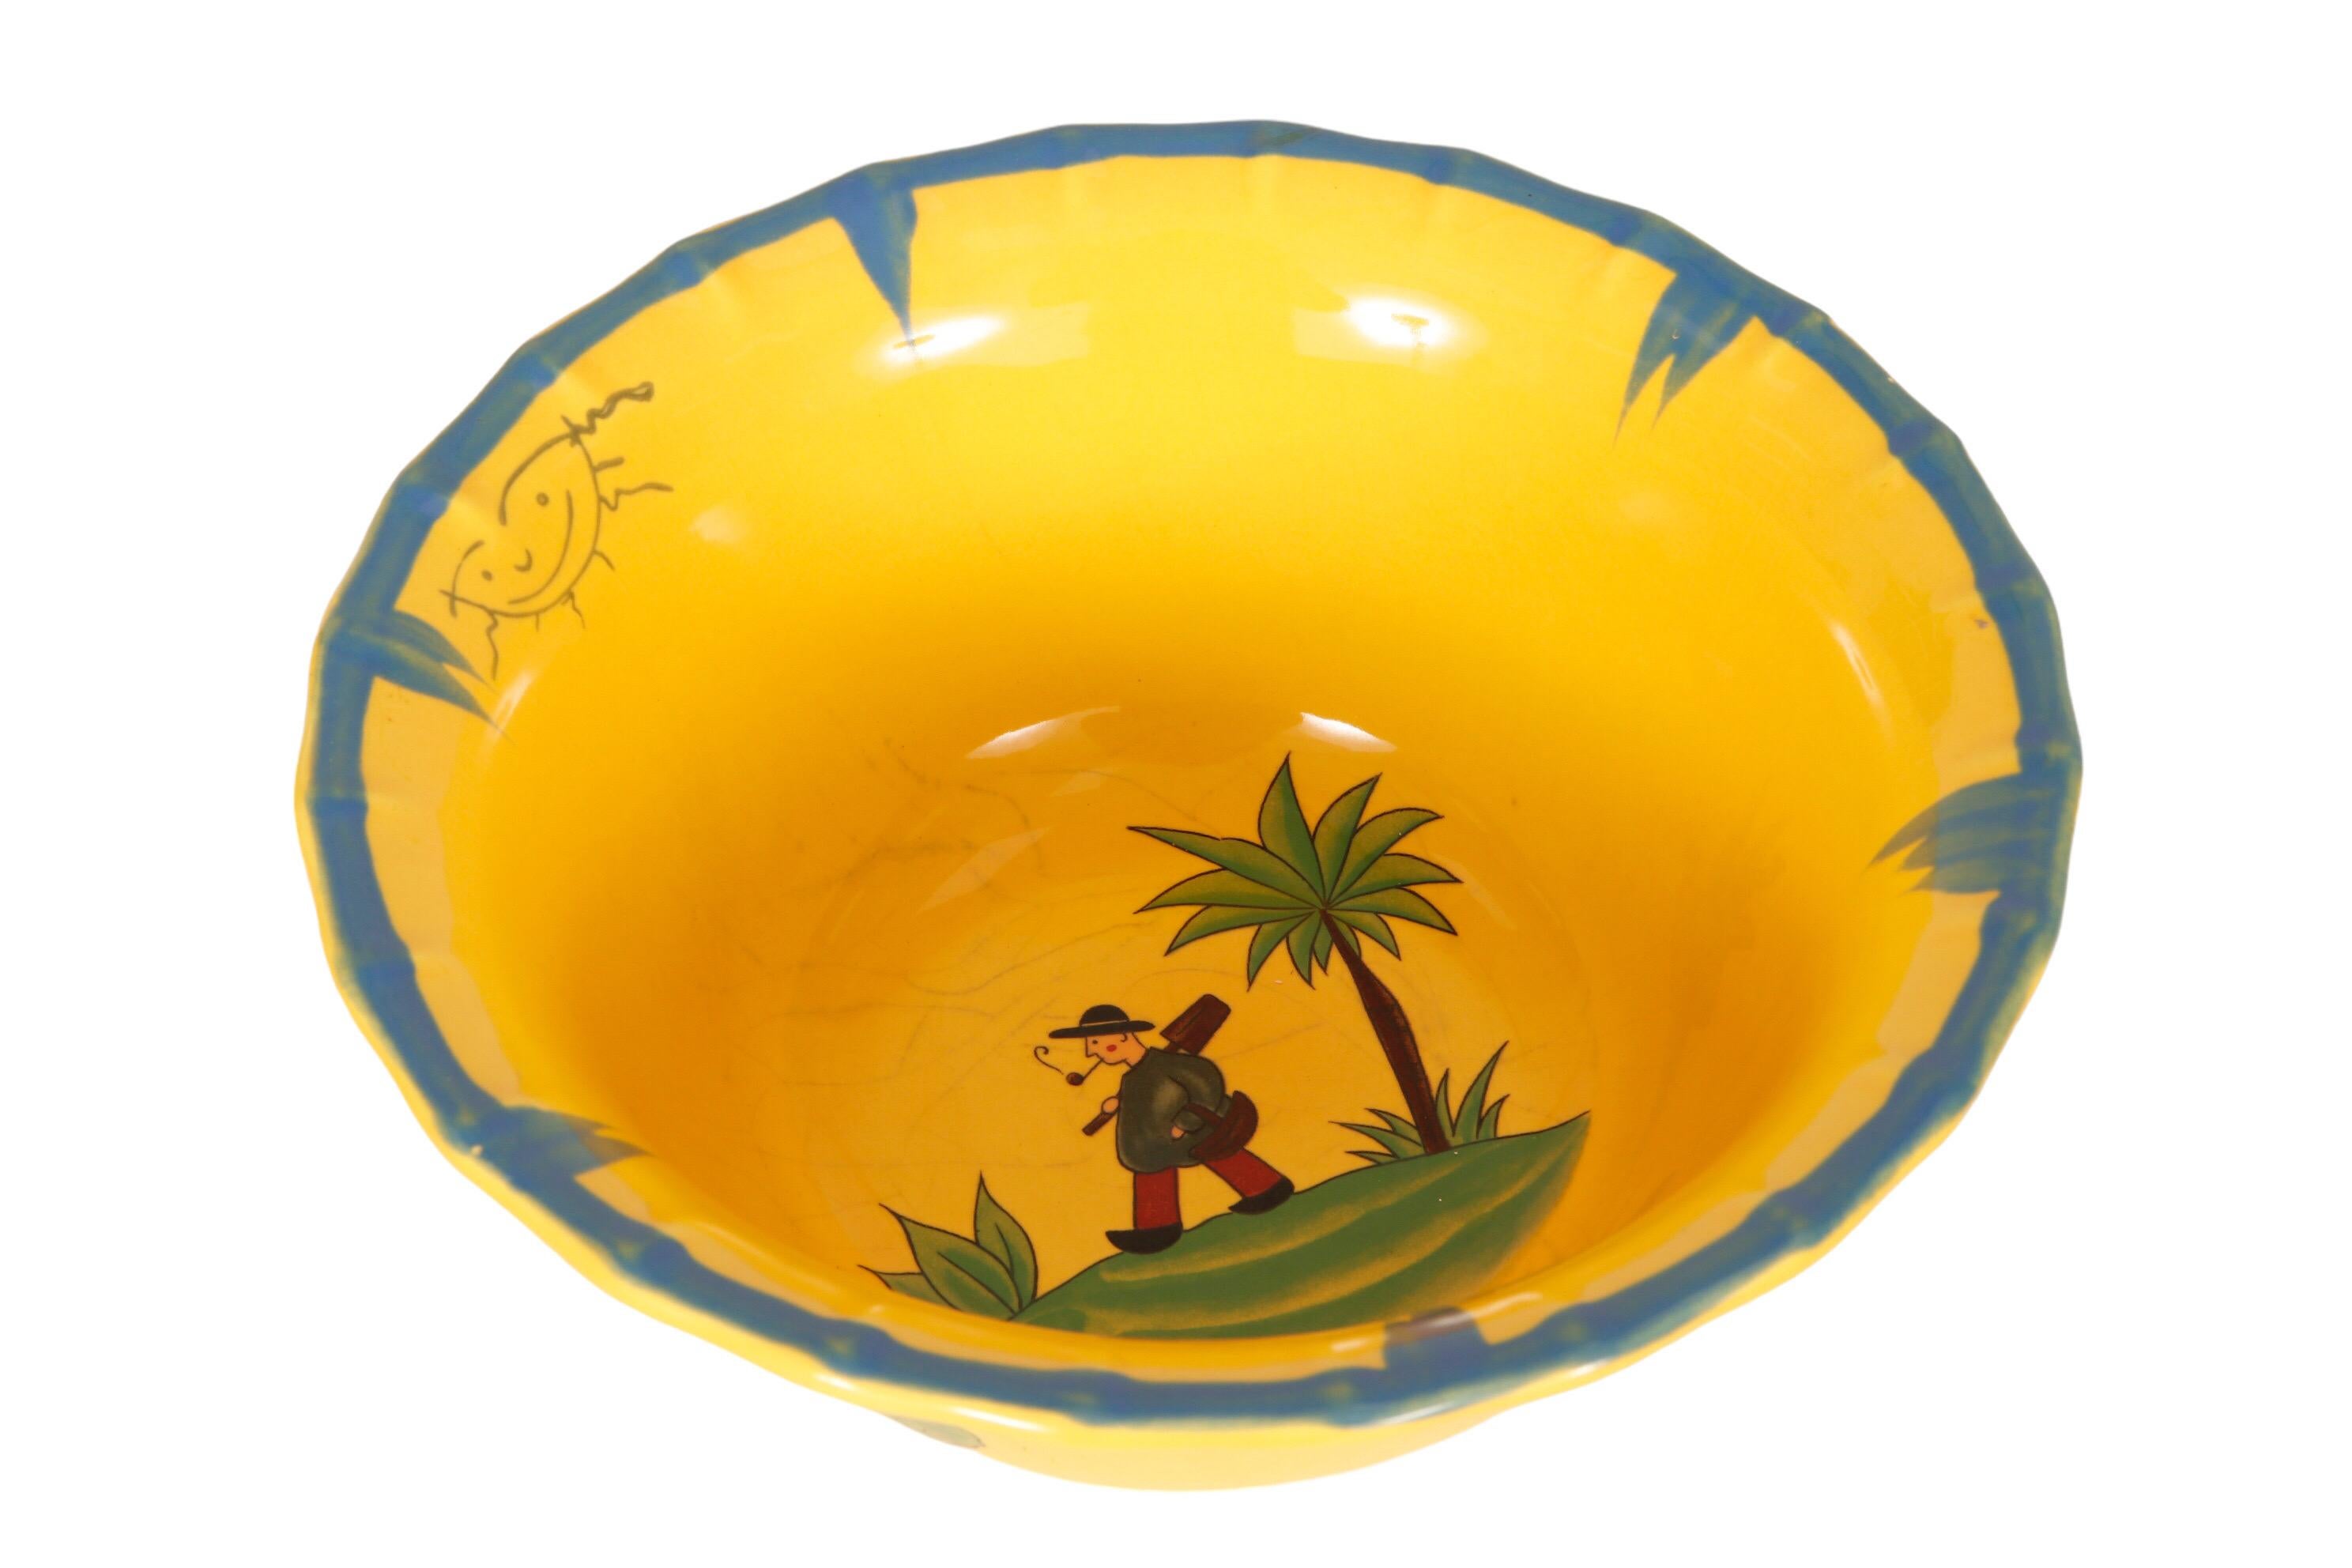 A large yellow ceramic bowl made by The Haldon Group. Decorated in the center with a simple walking figure smoking a pipe, reminiscent of the French Quimper Hiker. The rim of the bowl is edged in blue with a smiling sun. On the outside is a